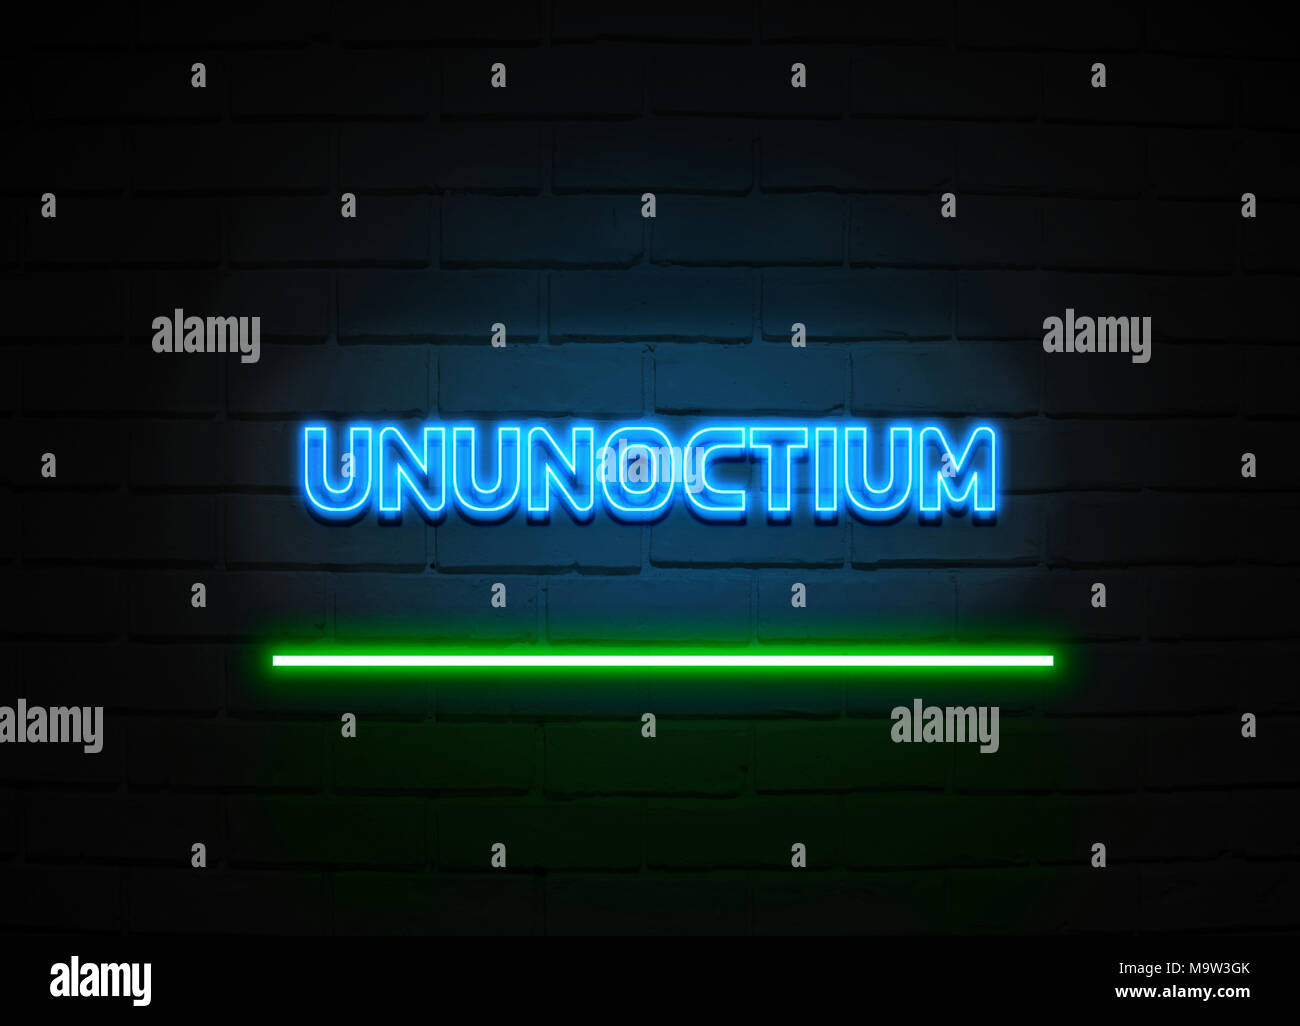 Ununoctium neon sign - Glowing Neon Sign on brickwall wall - 3D rendered royalty free stock illustration. Stock Photo